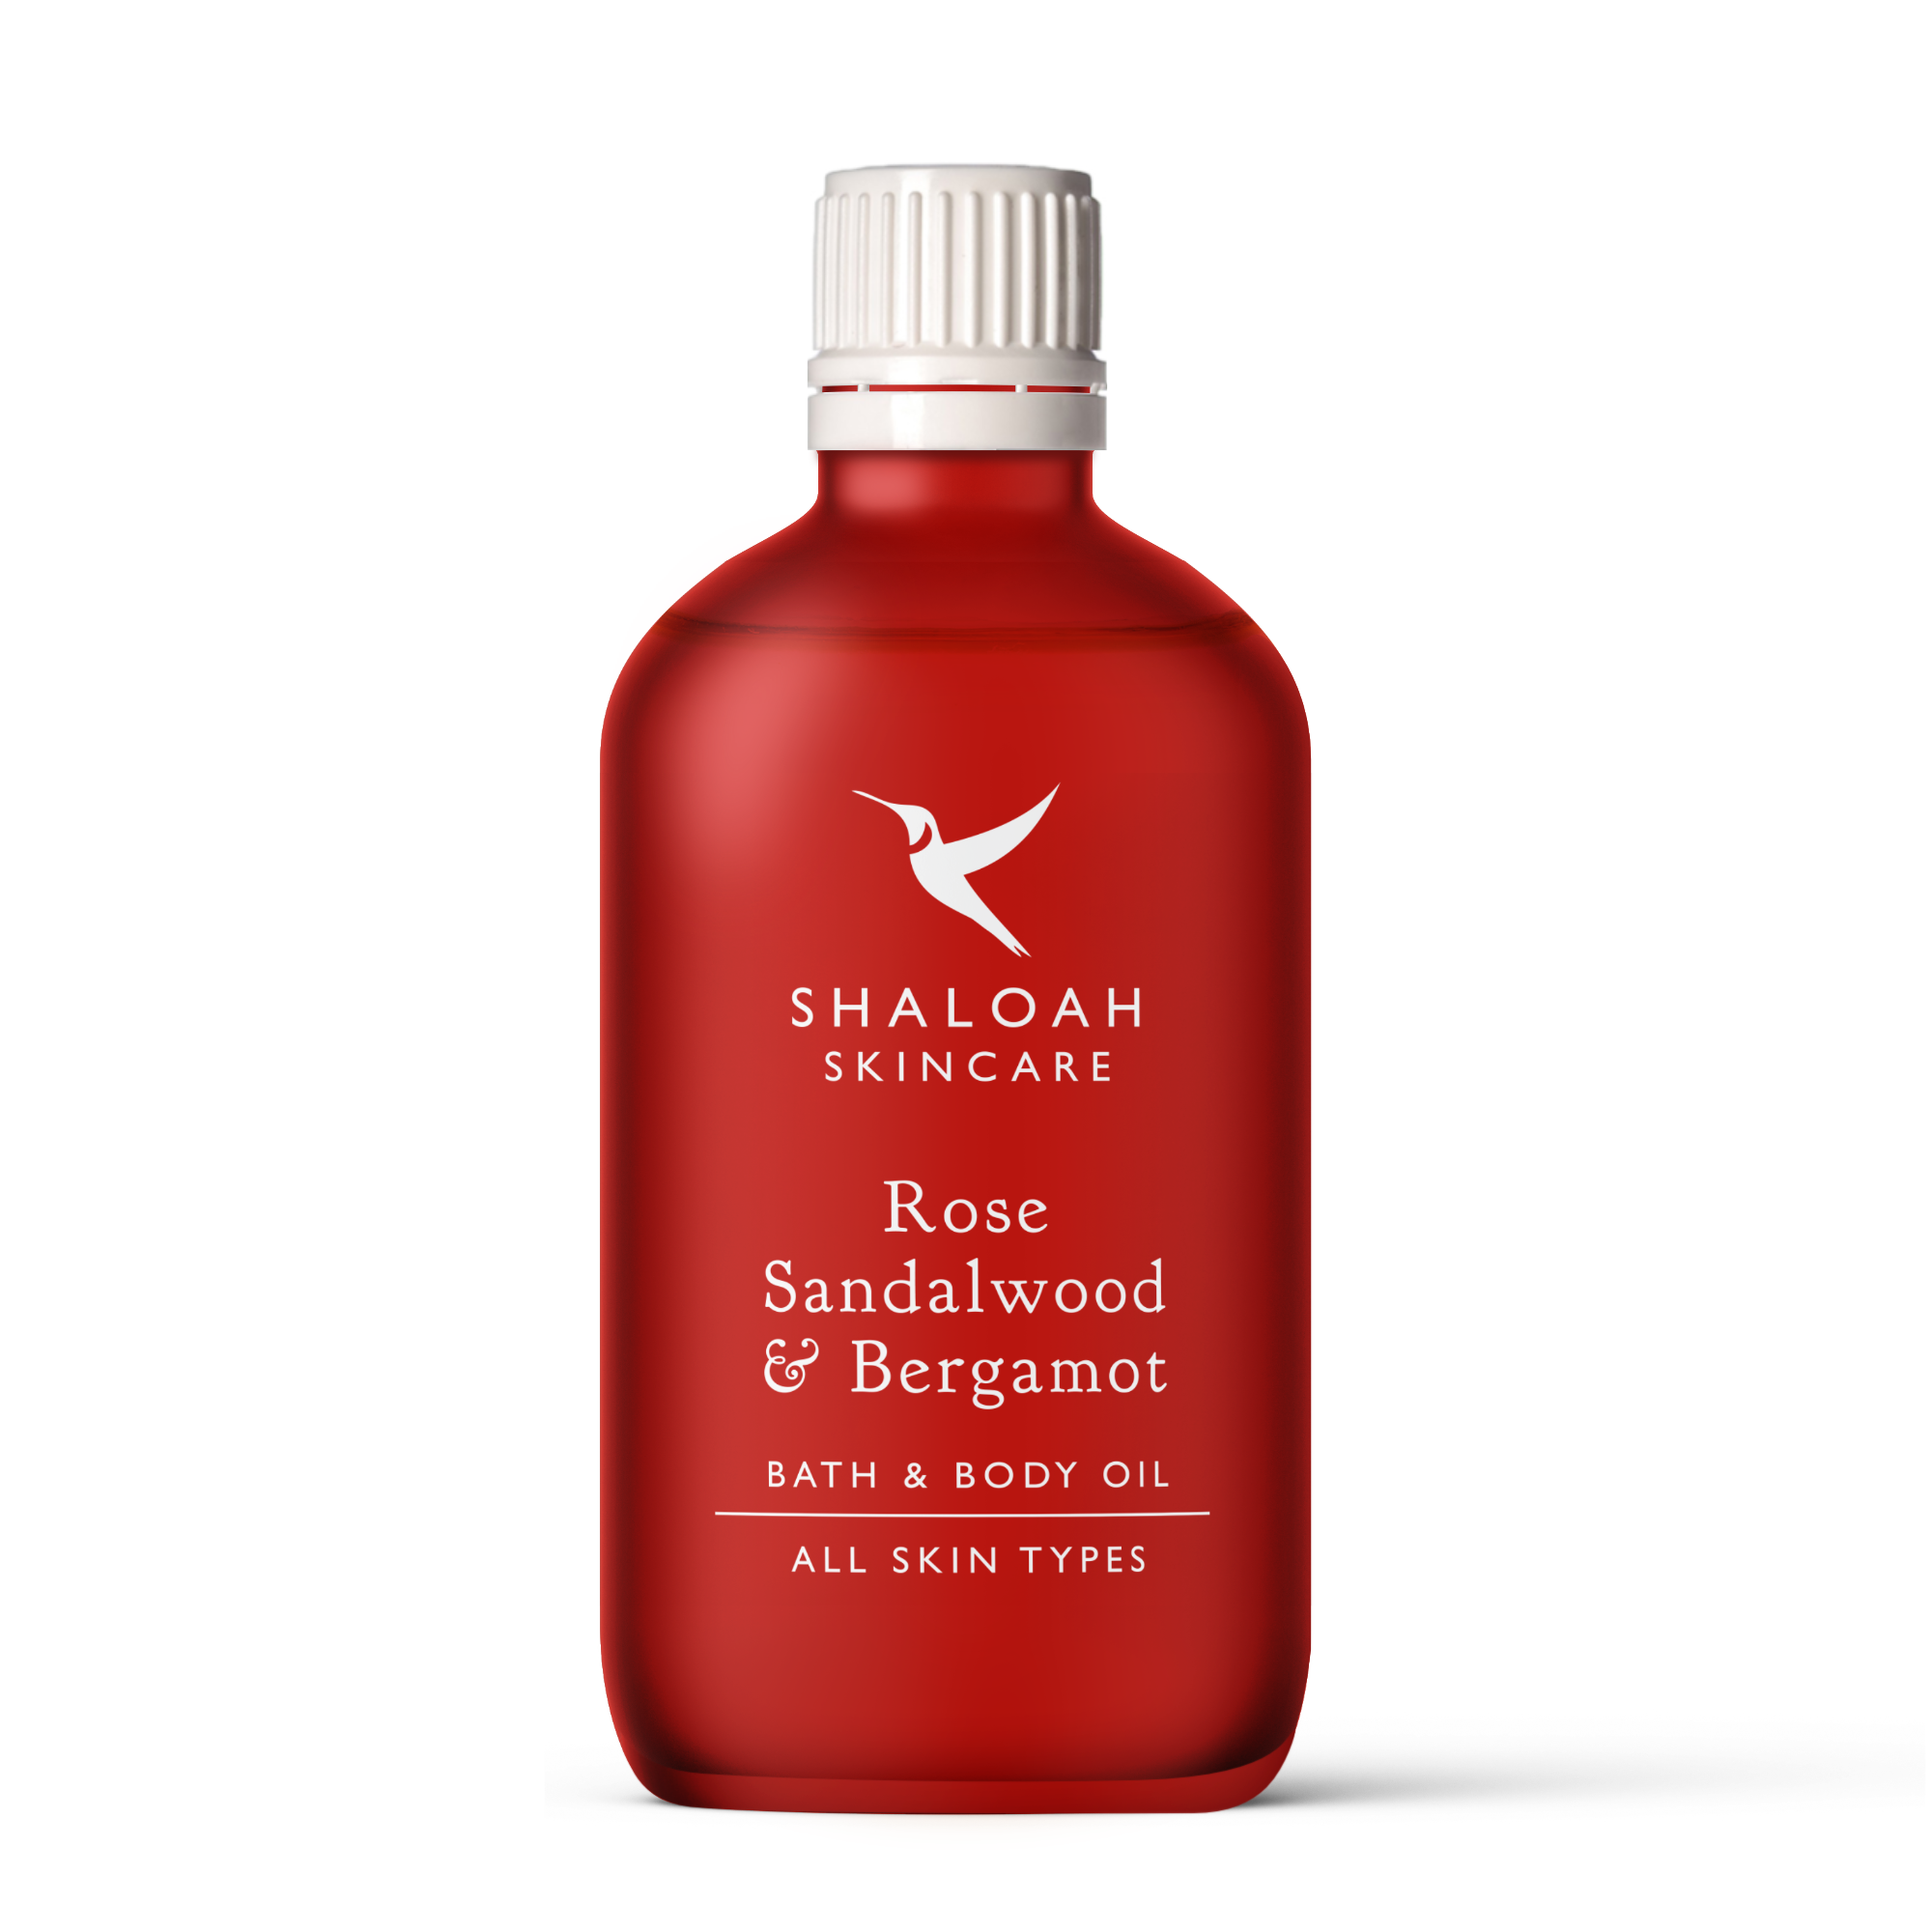 ROSE SANDALWOOD AND BERGAMOT BATH AND BODY OIL _ Organic Gifts _ Beauty Products _ Mother's Day _ Body Care _ Valentines Day _ Summer _ Cherry Cola _ Spring _ Roses _ Red _ Sustainable _ Wellbeing _ Bathroom _ Vega.jpg